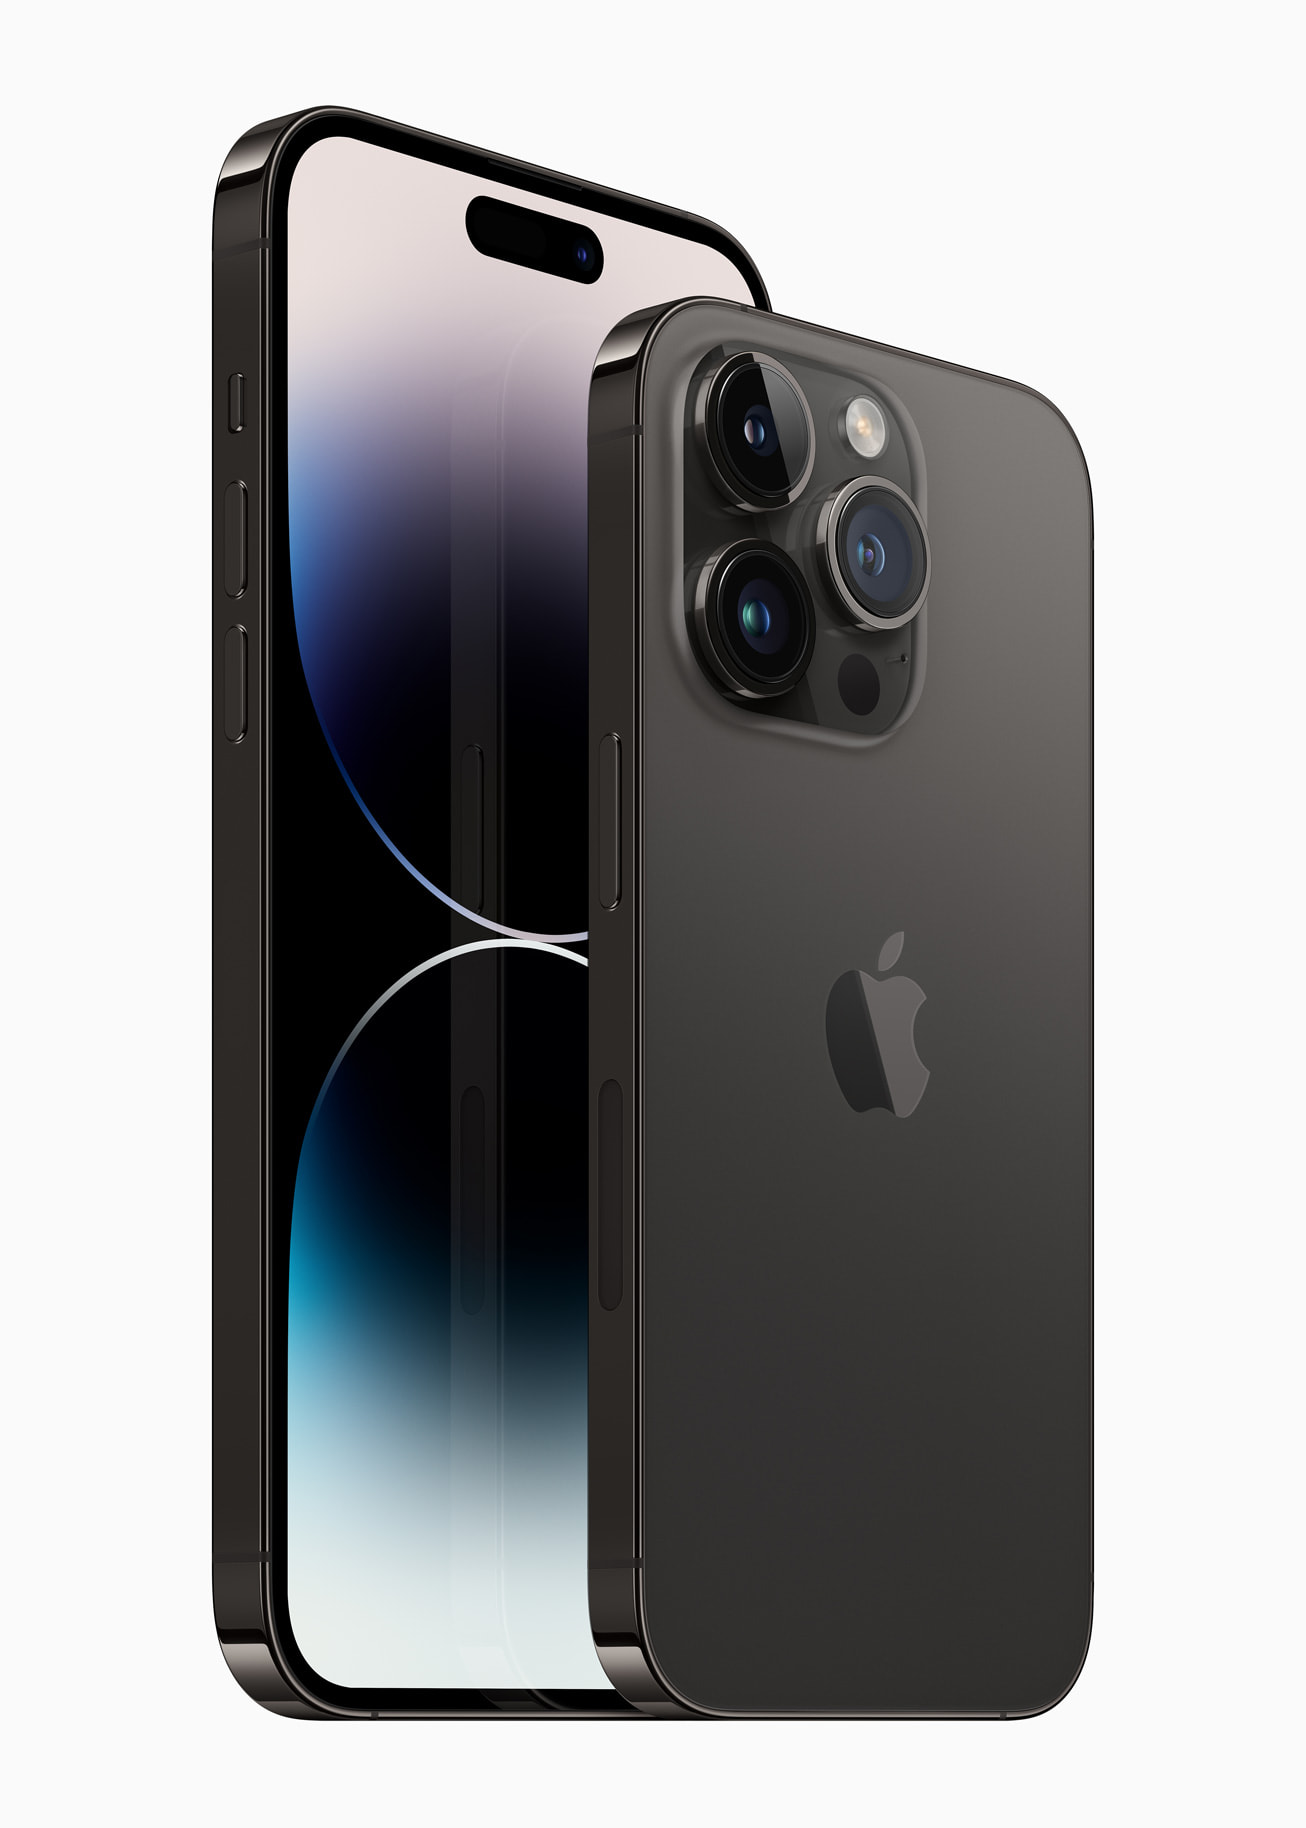 iPhone 14 Pro and iPhone 14 Pro Max       Image source: Apple 